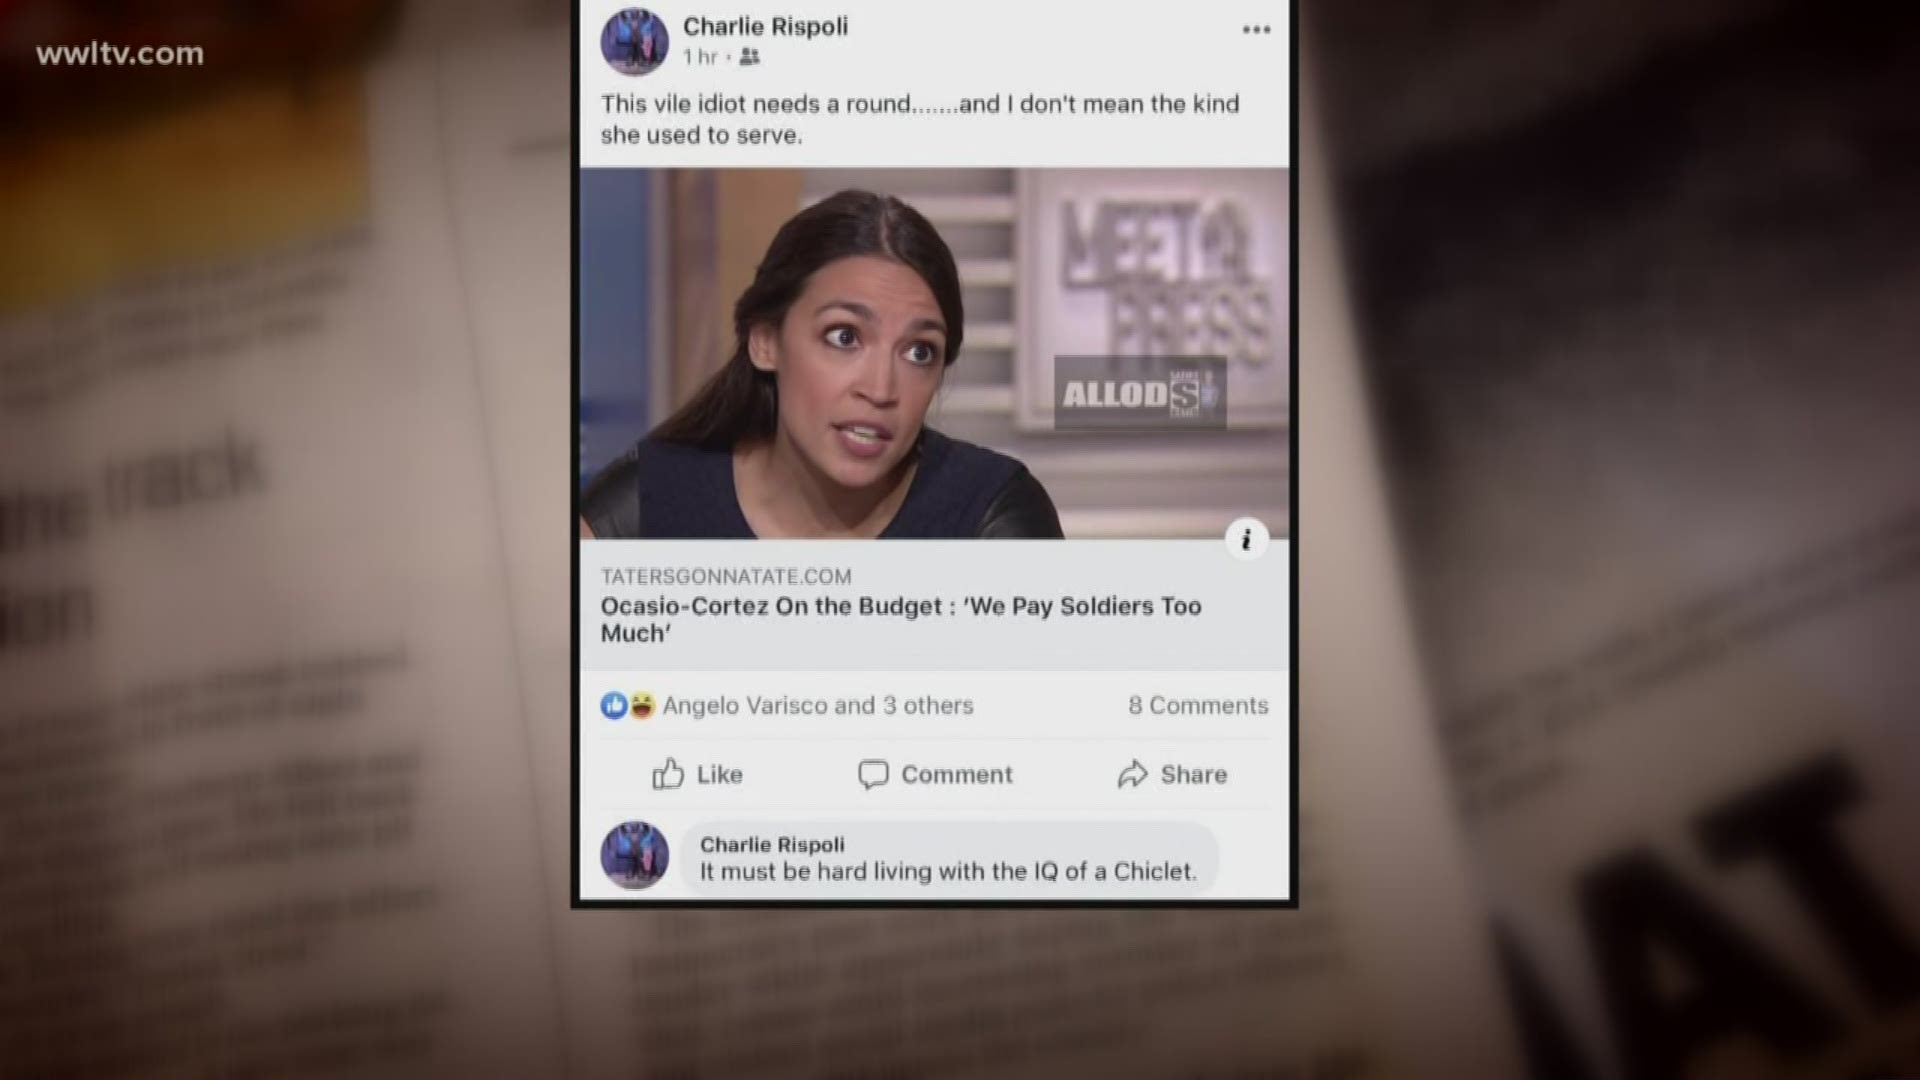 Two Gretna police officers were fired Monday in relation to a Facebook post that alluded to shooting U.S. Rep. Alexandria Ocasio-Cortez.